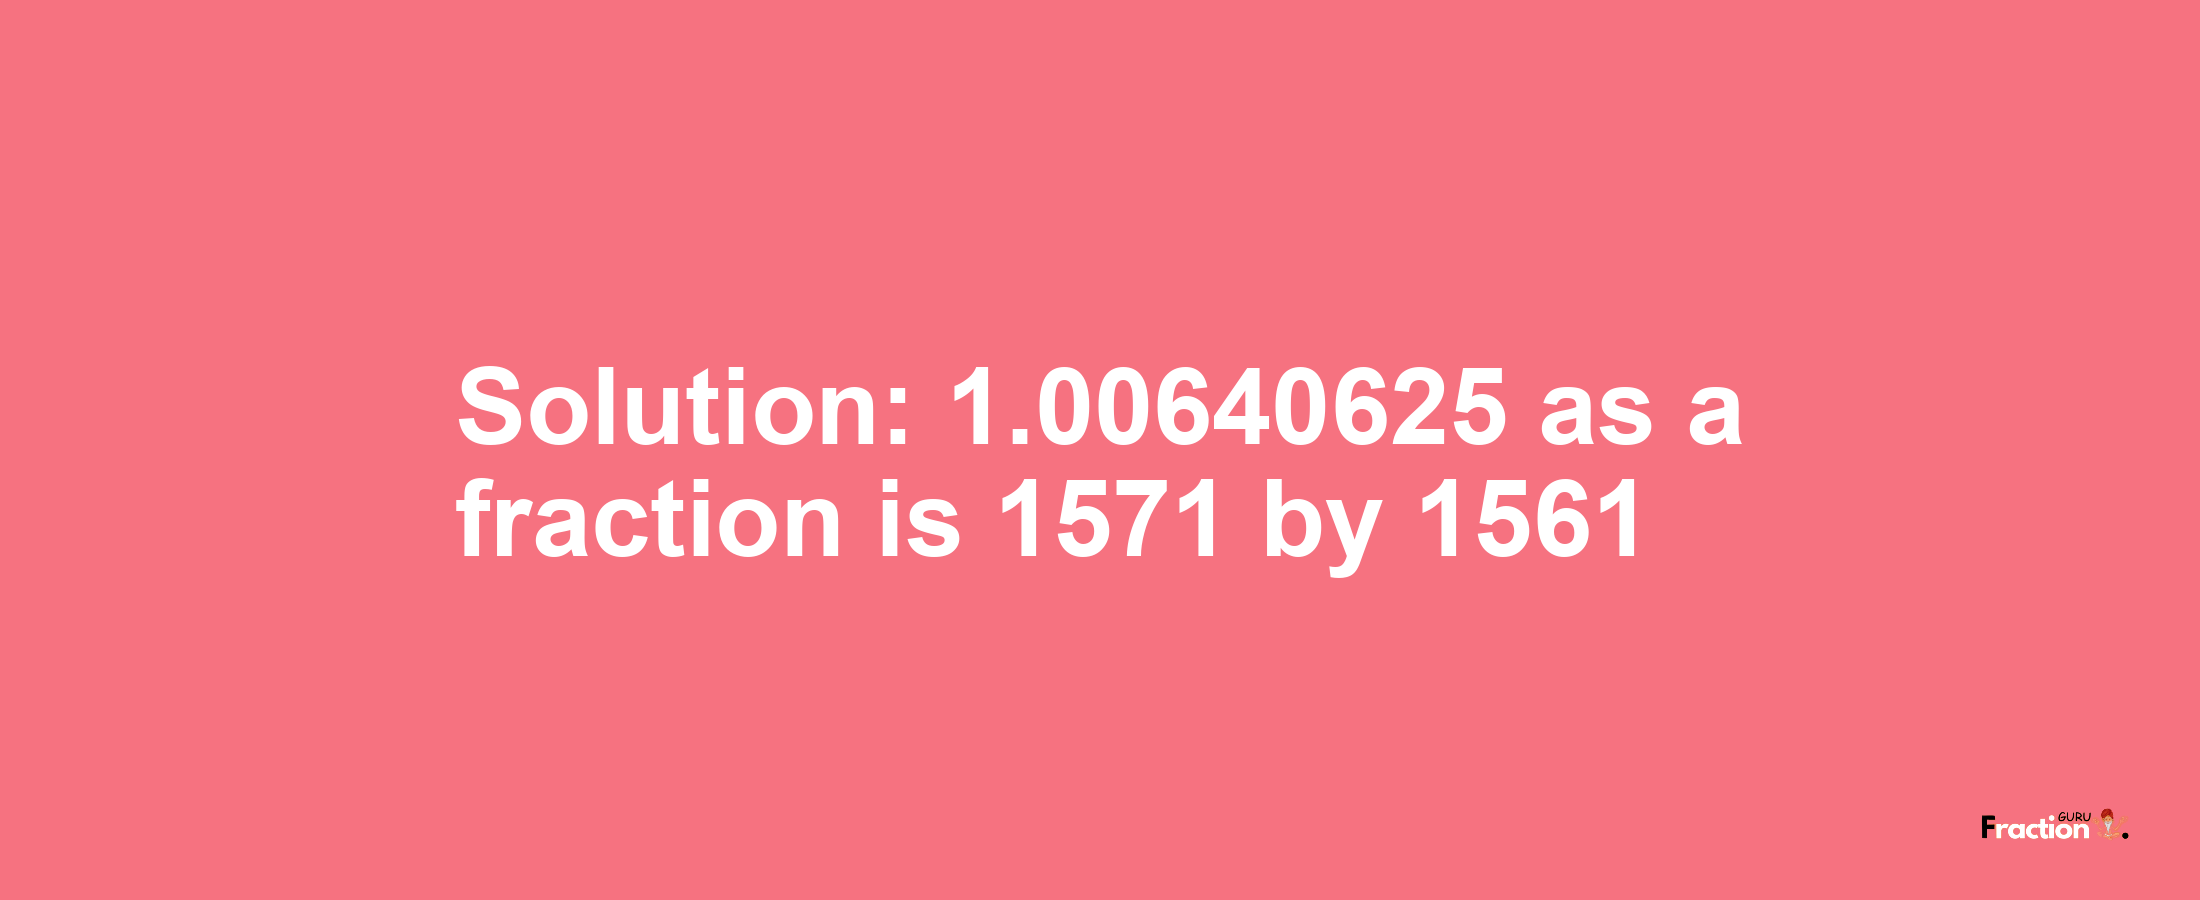 Solution:1.00640625 as a fraction is 1571/1561